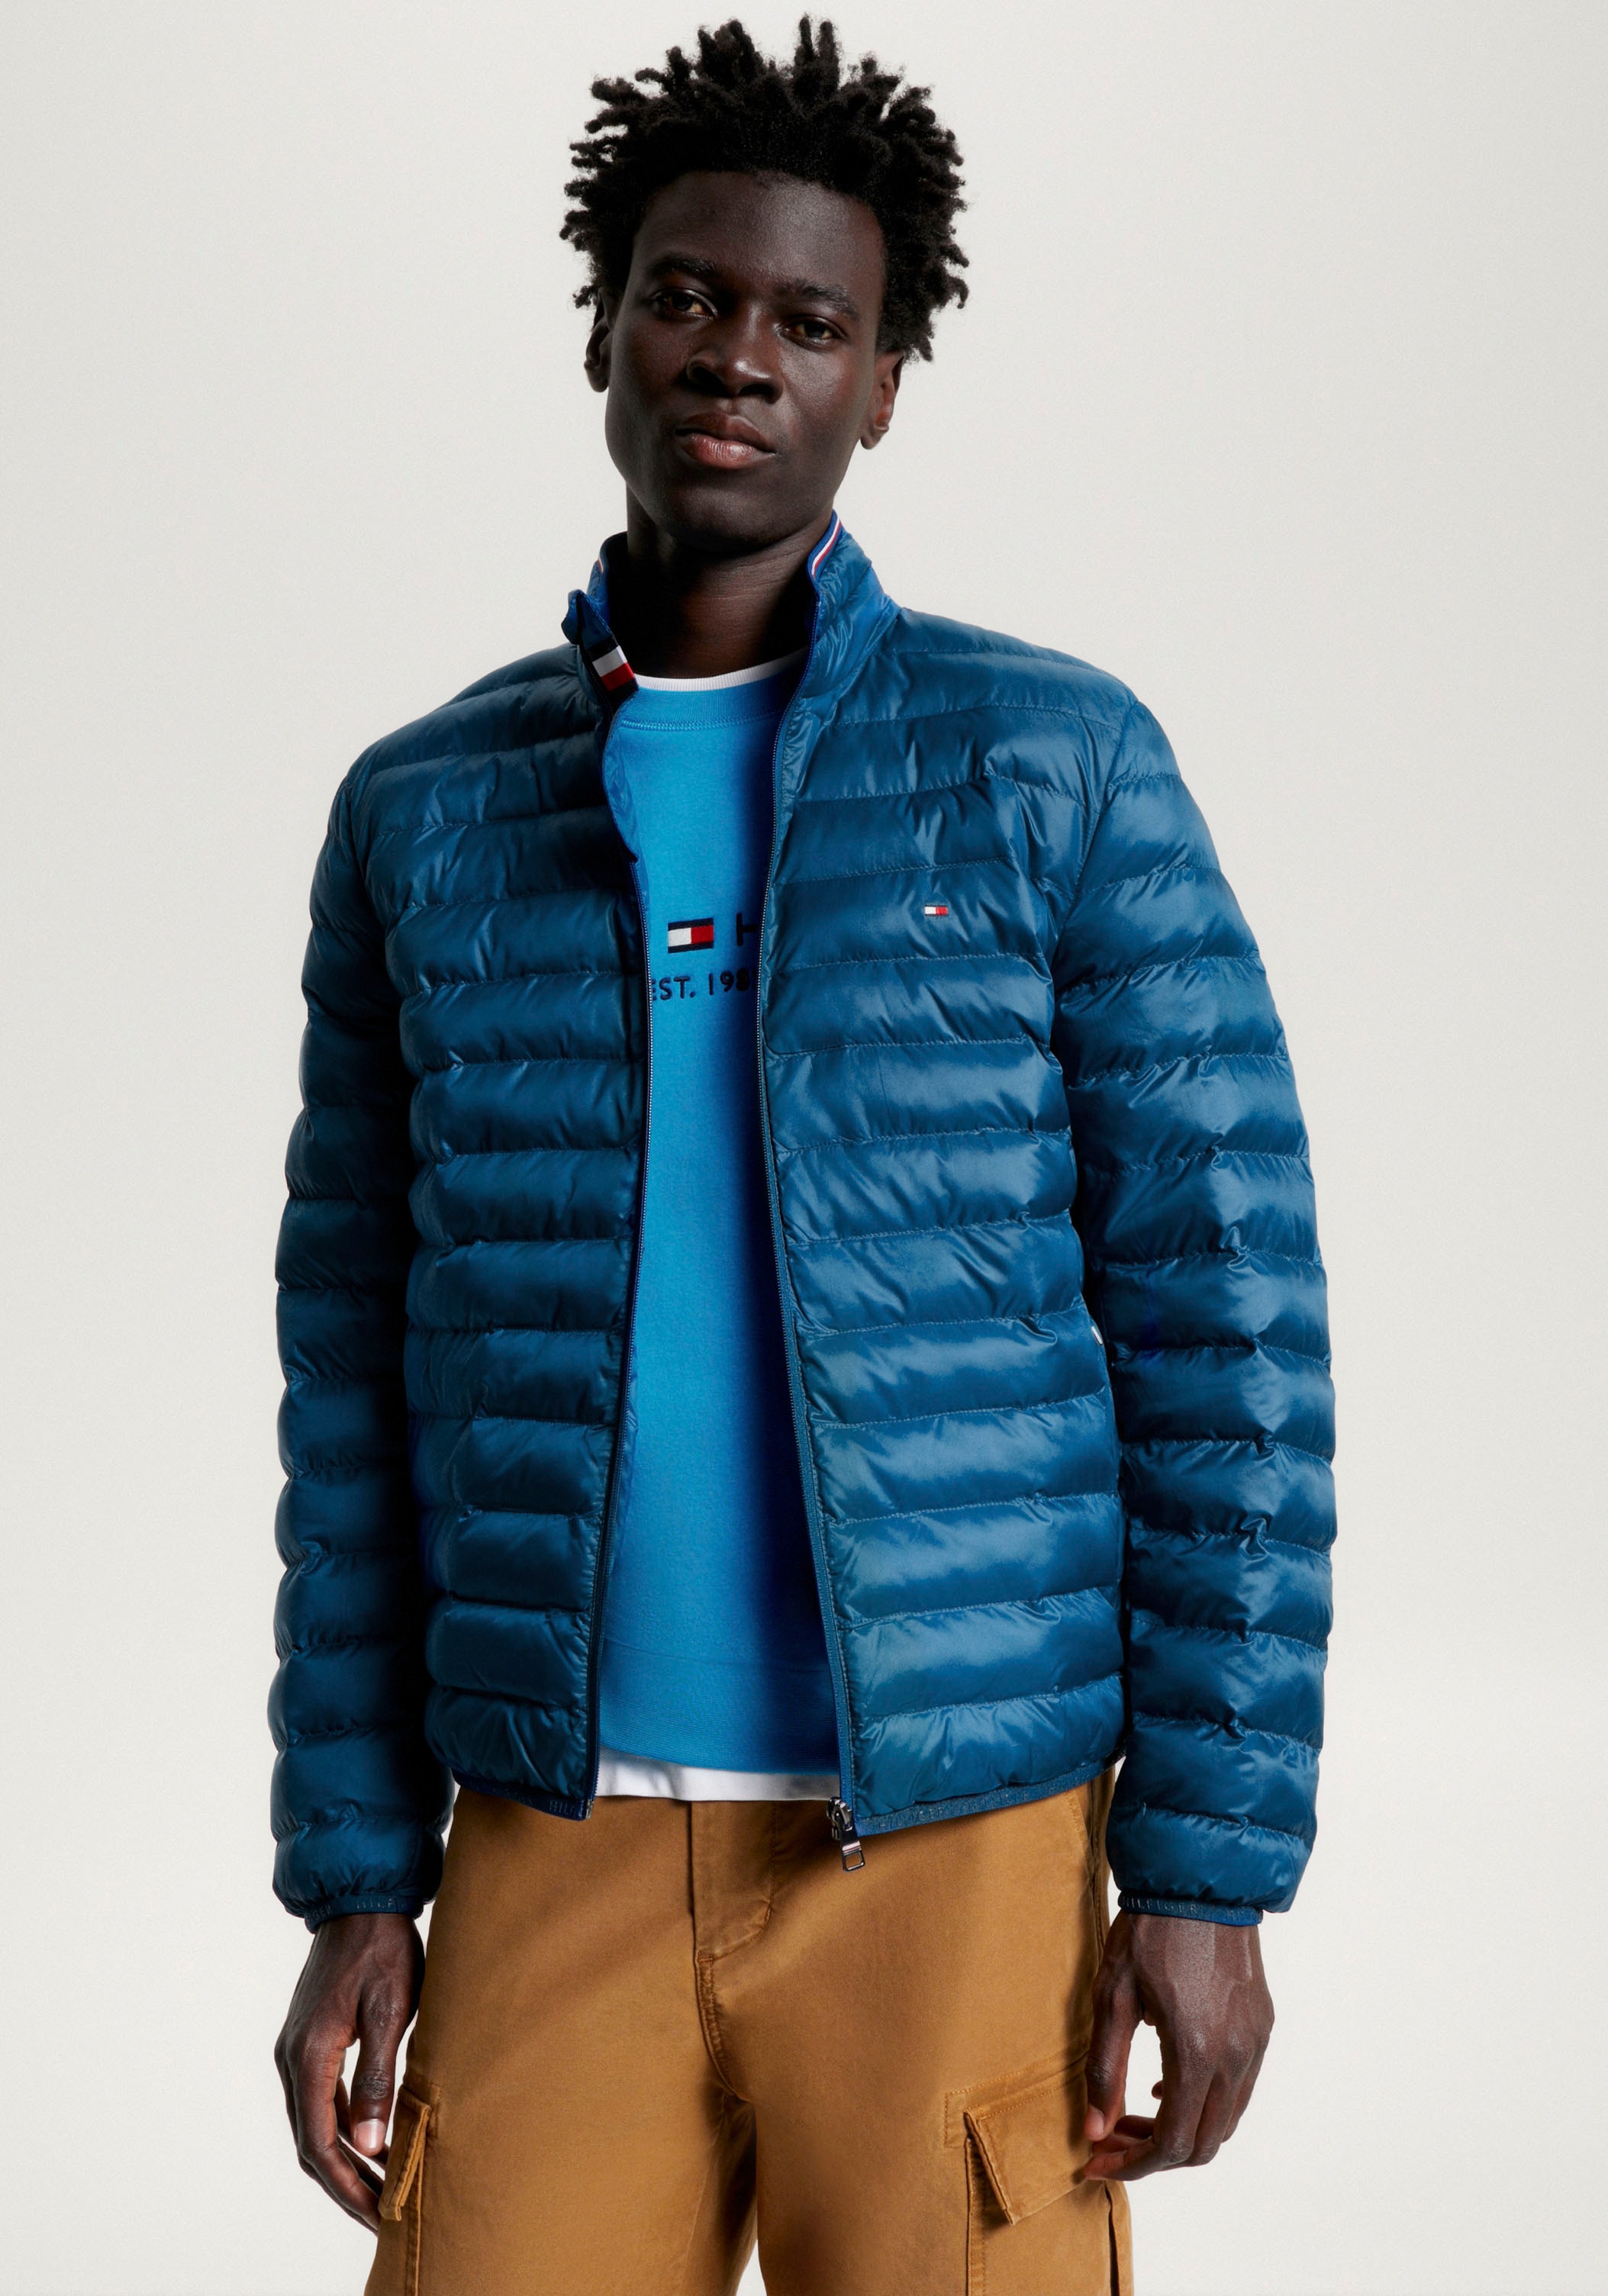 Steppjacke Tommy Hilfiger bei RECYCLED OTTO kaufen JACKET,« »PACKABLE